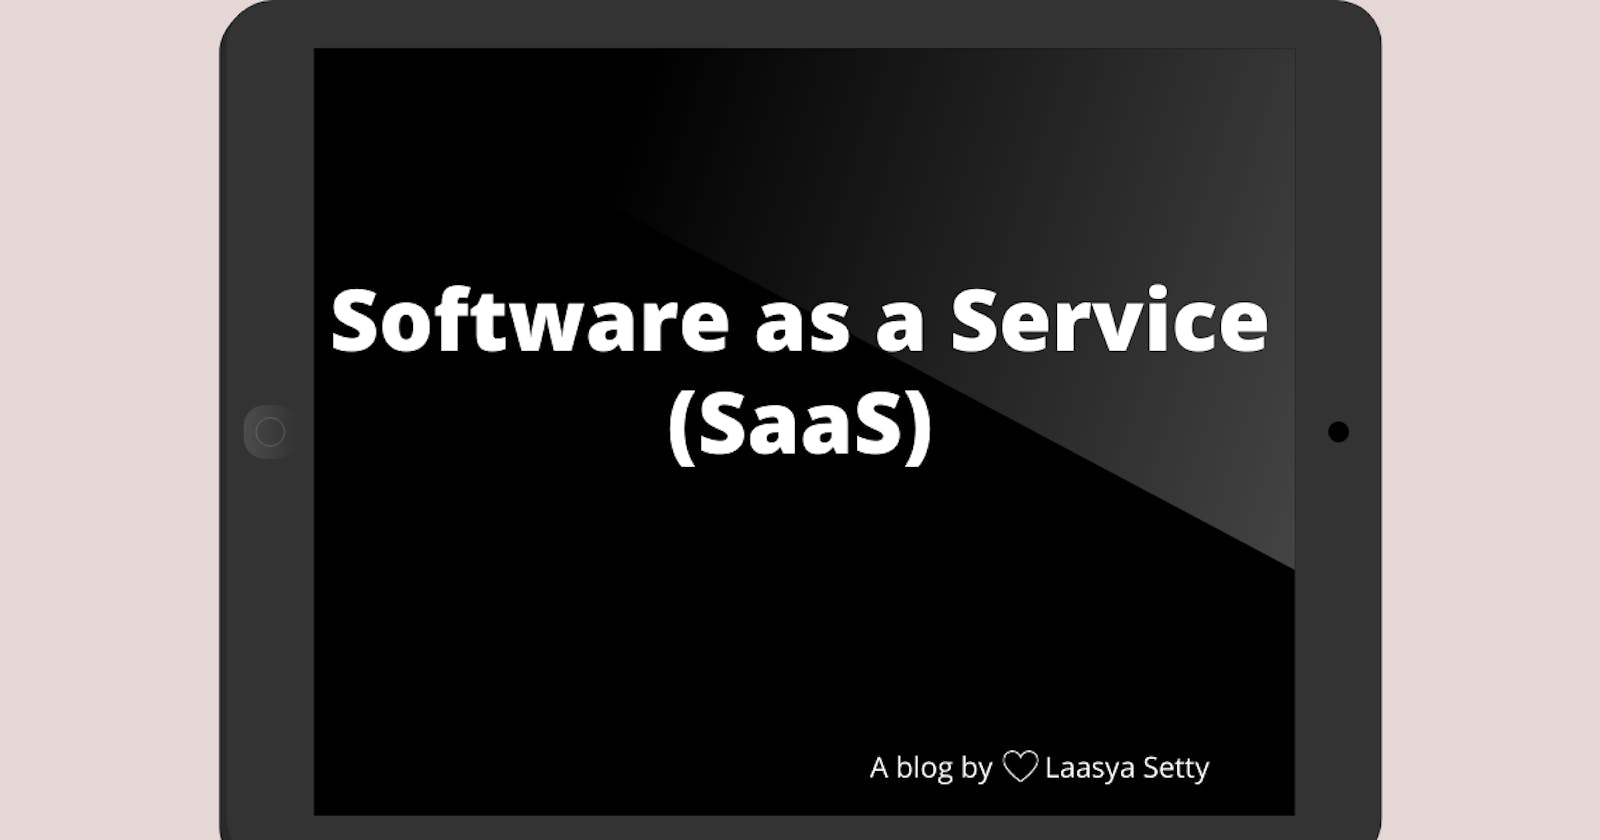 Detailed Explanation of "Software as a Service(SaaS)" - Cloud